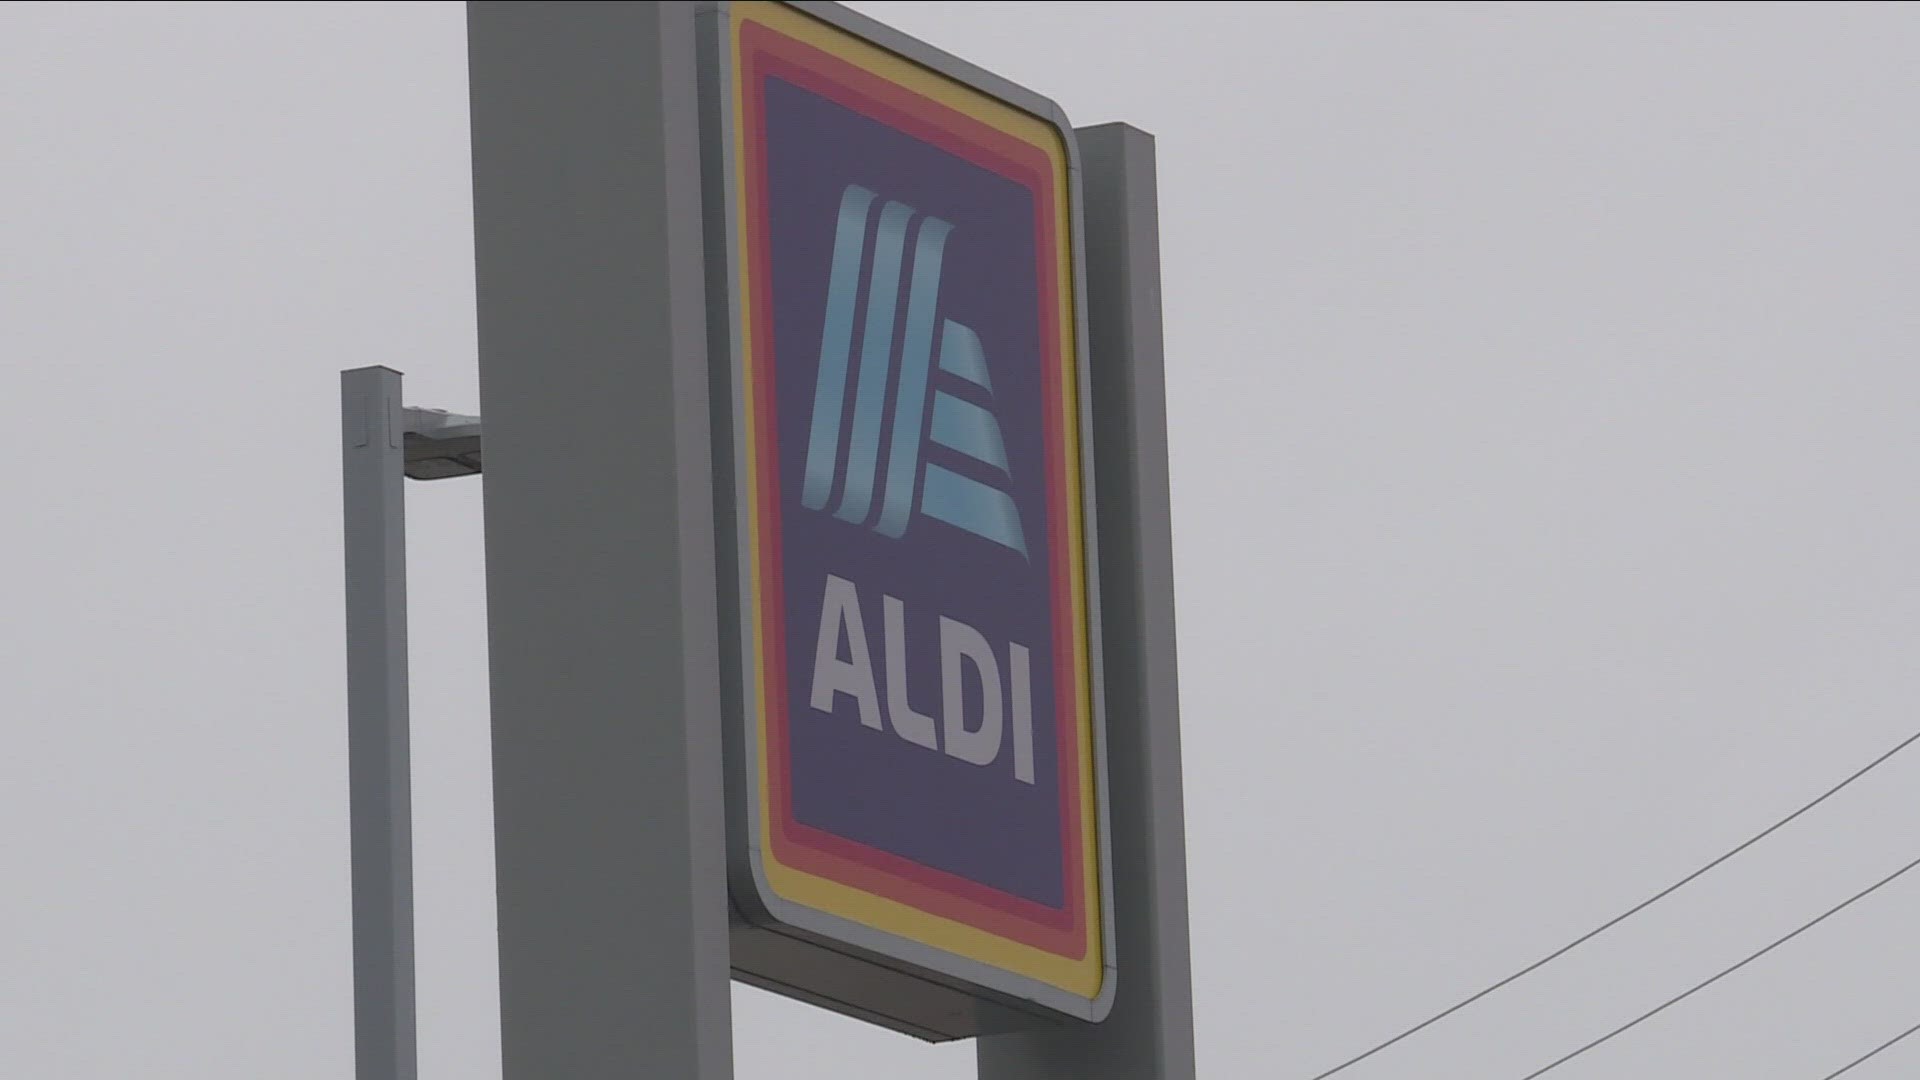 Aldi to sell beer in WNY stores beginning this fall